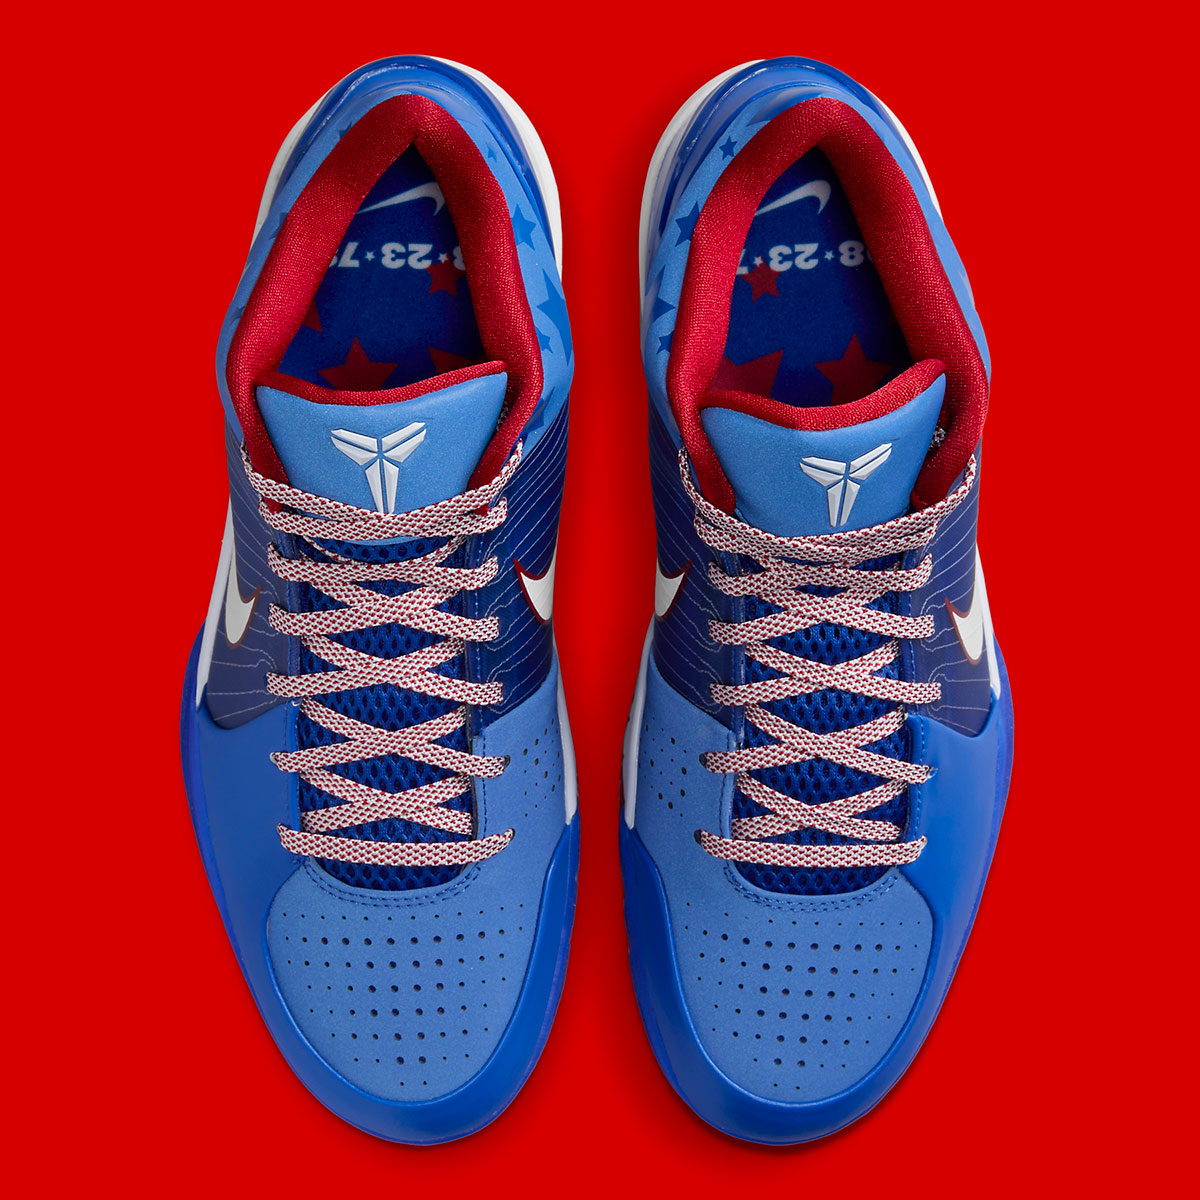 Kobe 4 Philly Release Date Fq3545 400 4